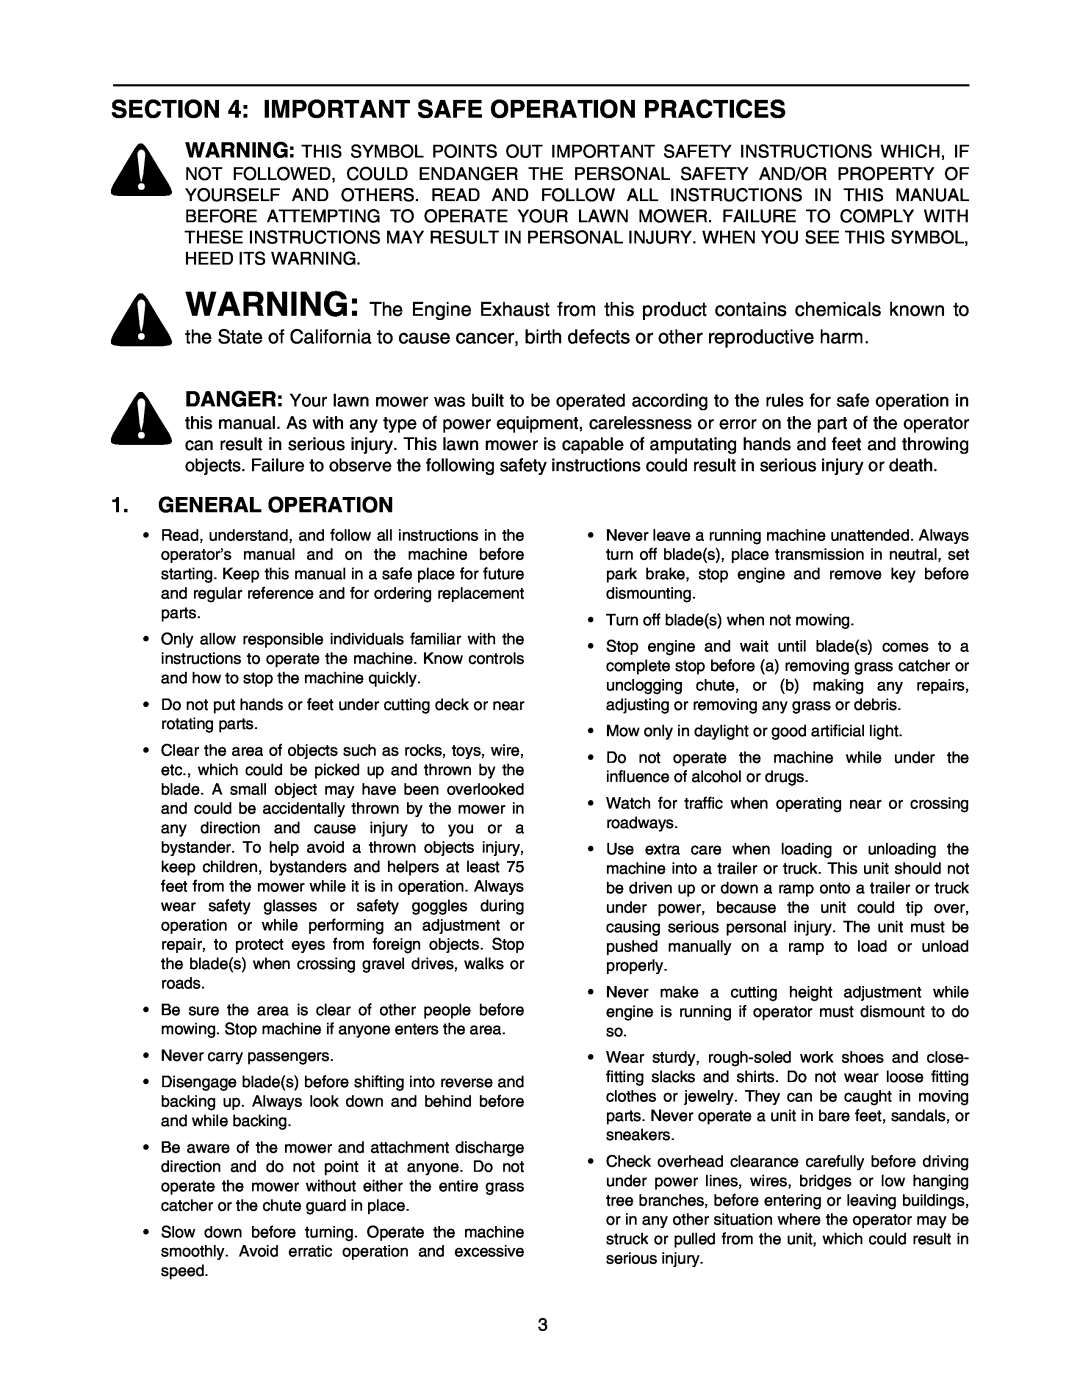 MTD 608, 609 manual Important Safe Operation Practices, General Operation 